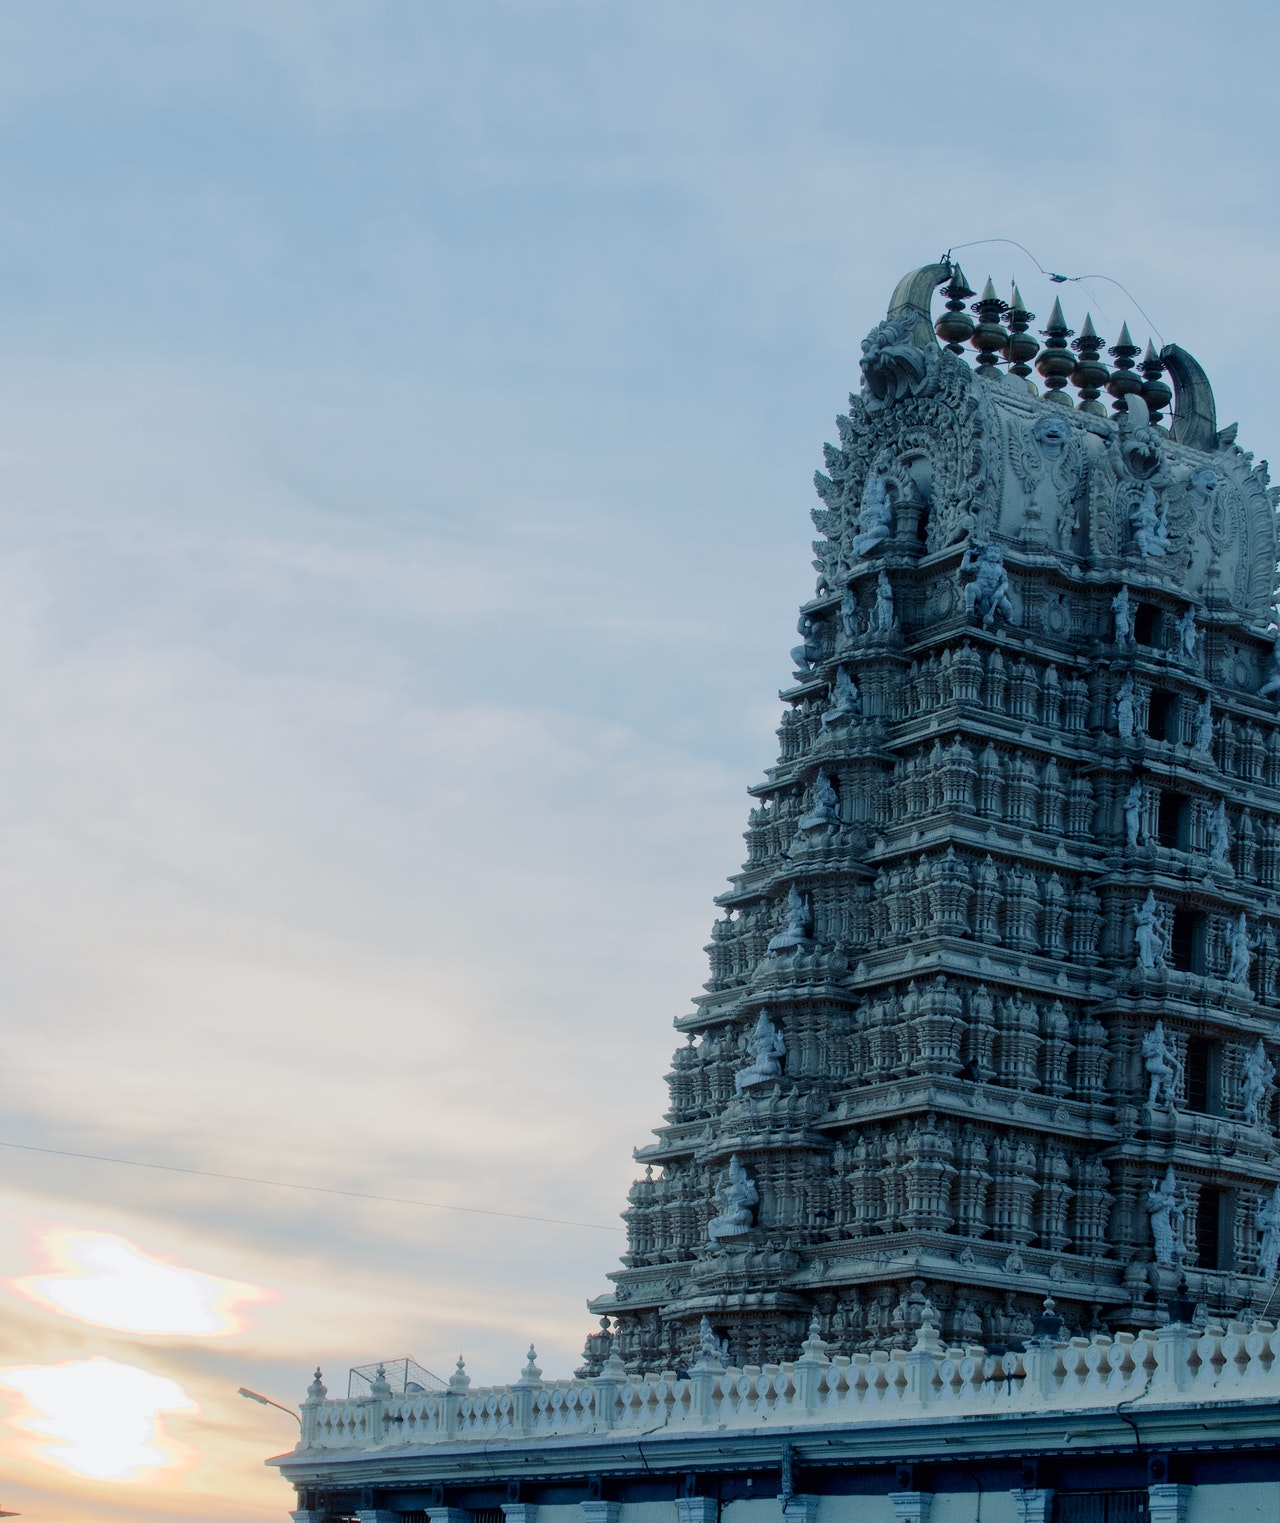 One day Tirupati tour package from Chennai